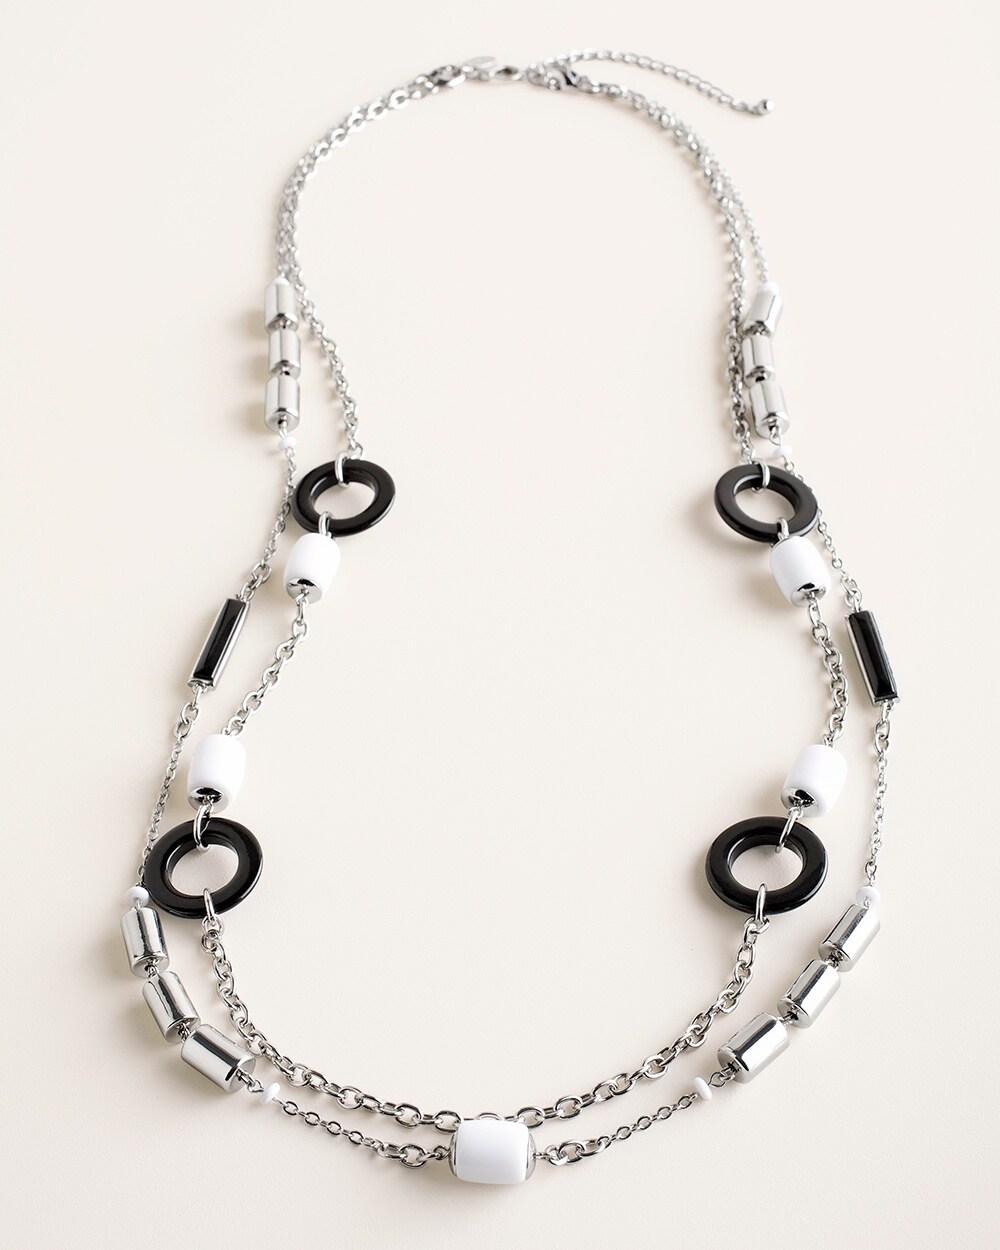 Convertible Black and White Sleek Multi-Strand Necklace